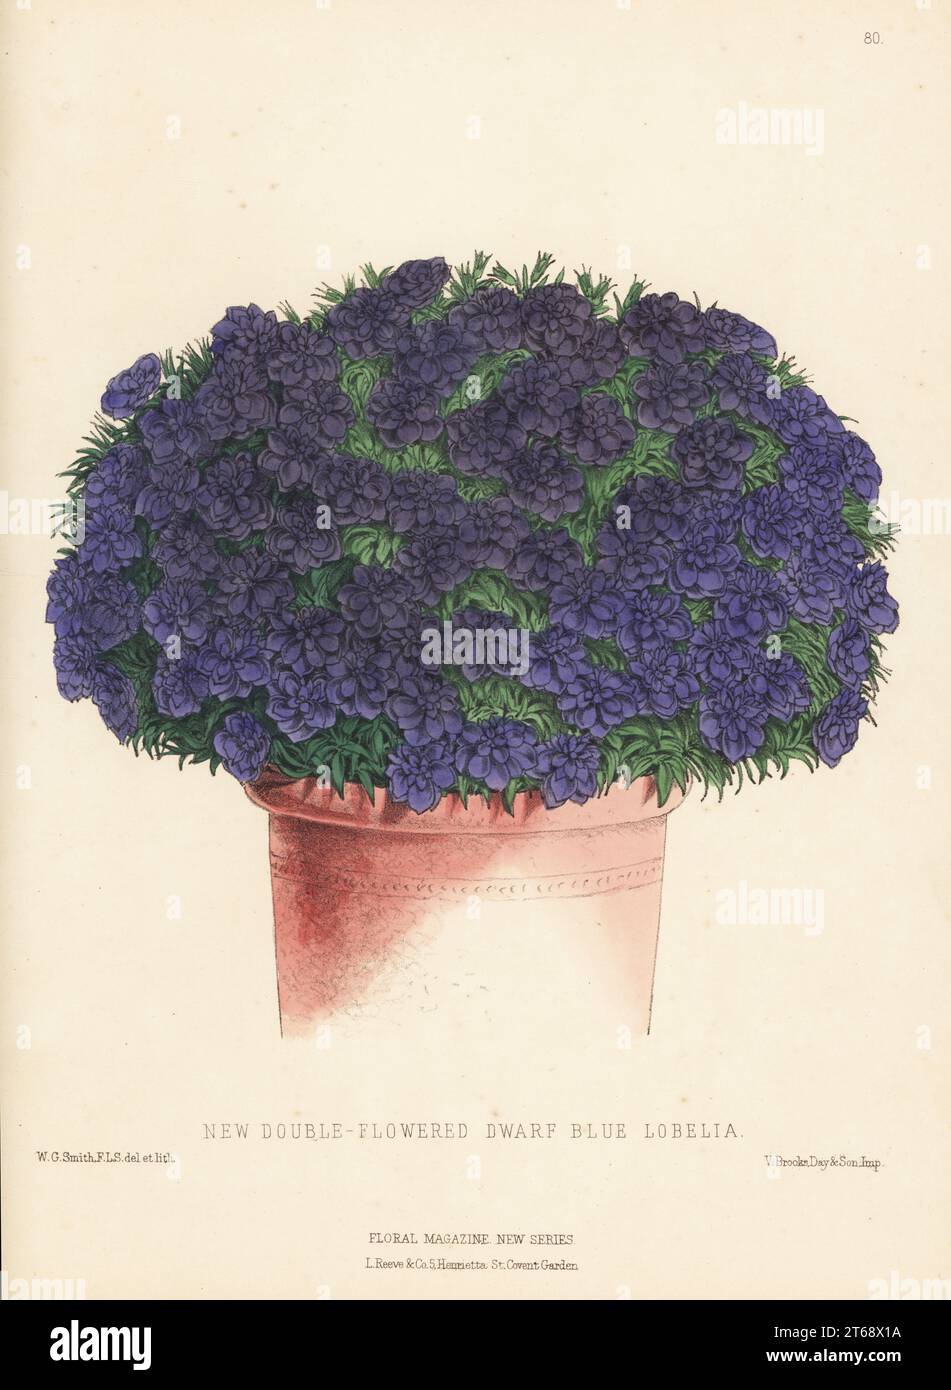 New double-flowered dwarf blue Lobelia in plant pot. From Dixon and Co. Nursery, Moorgate Street, Hackney. Handcolored botanical illustration drawn and lithographed by Worthington George Smith from Henry Honywood Dombrain's Floral Magazine, New Series, Volume 2, L. Reeve, London, 1873. Lithograph printed by Vincent Brooks, Day & Son. Stock Photo